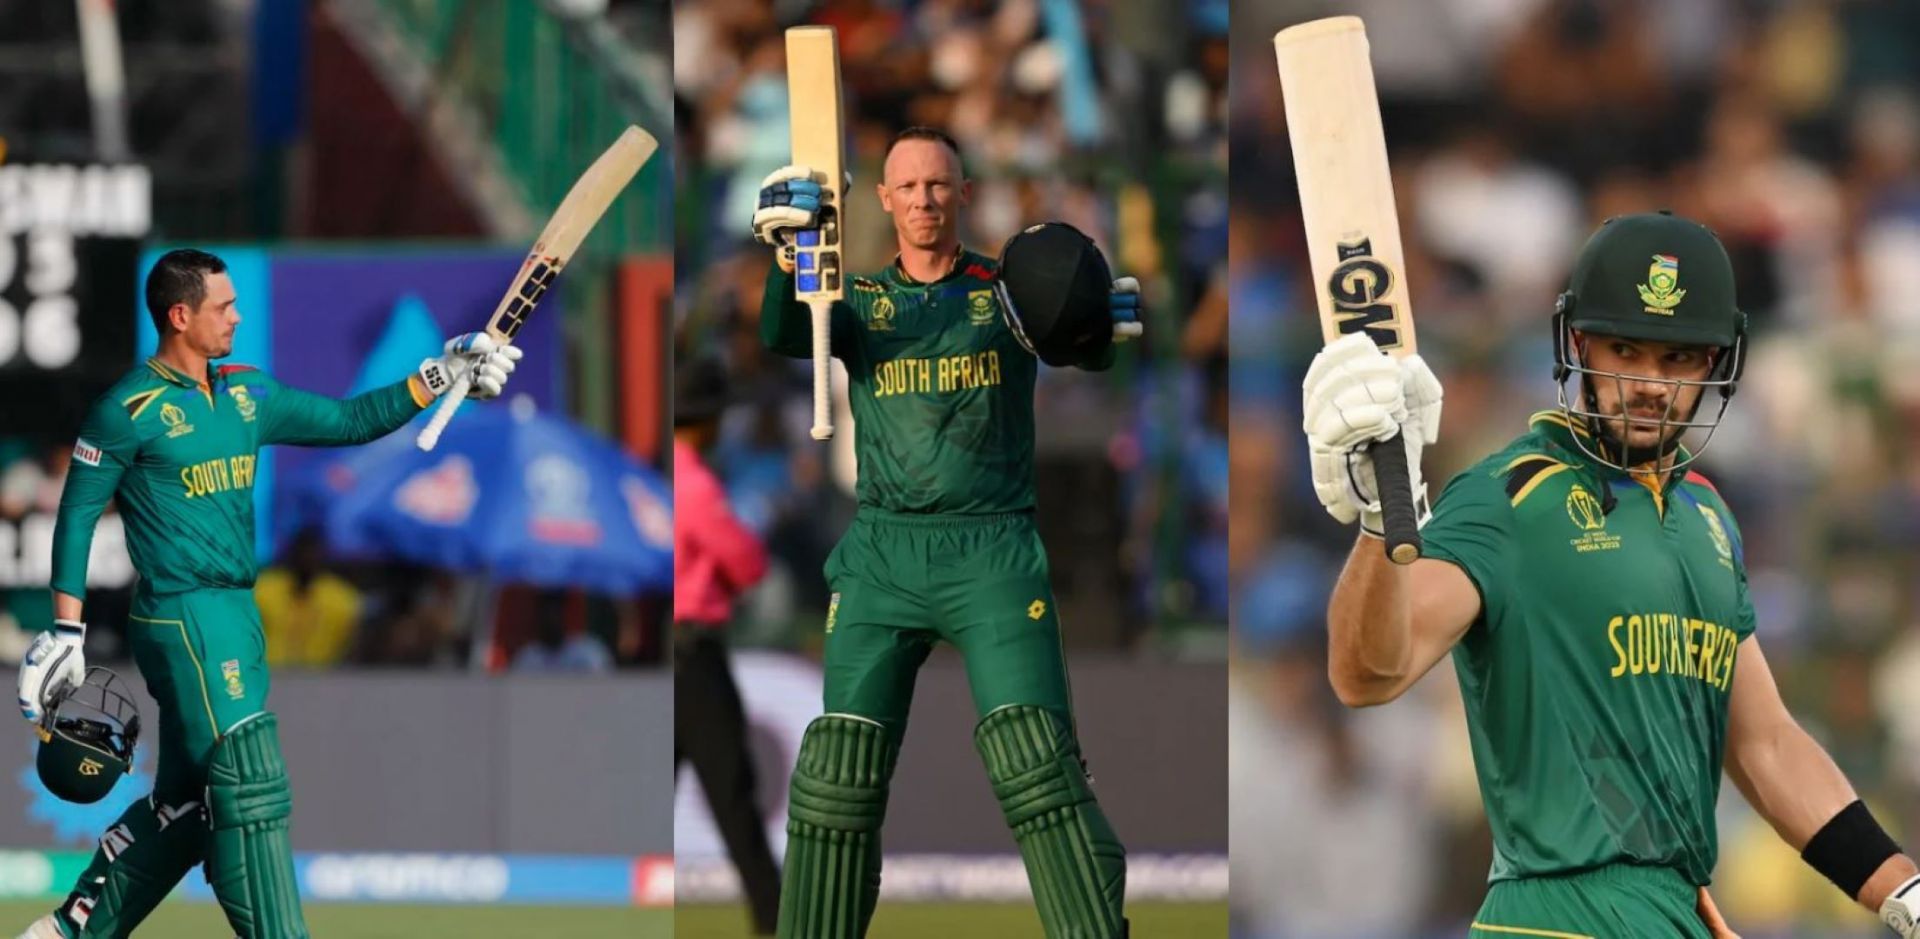 South Africa had three centurions in their record-breaking batting display.